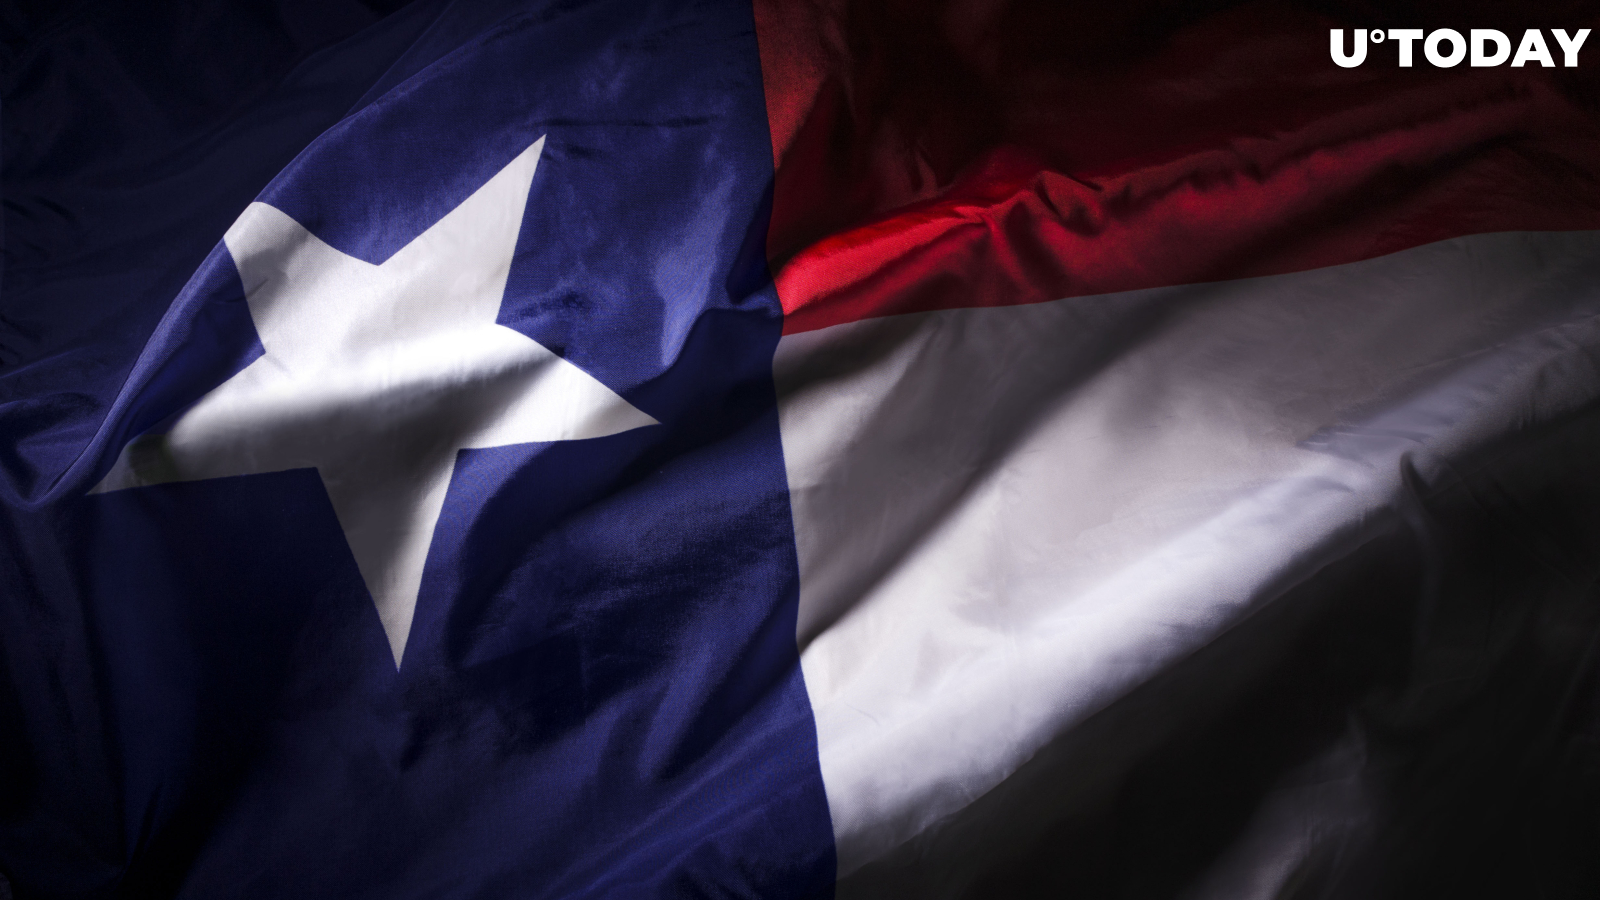 37 Percent of Texans Want to Make Bitcoin Official Currency: Poll 